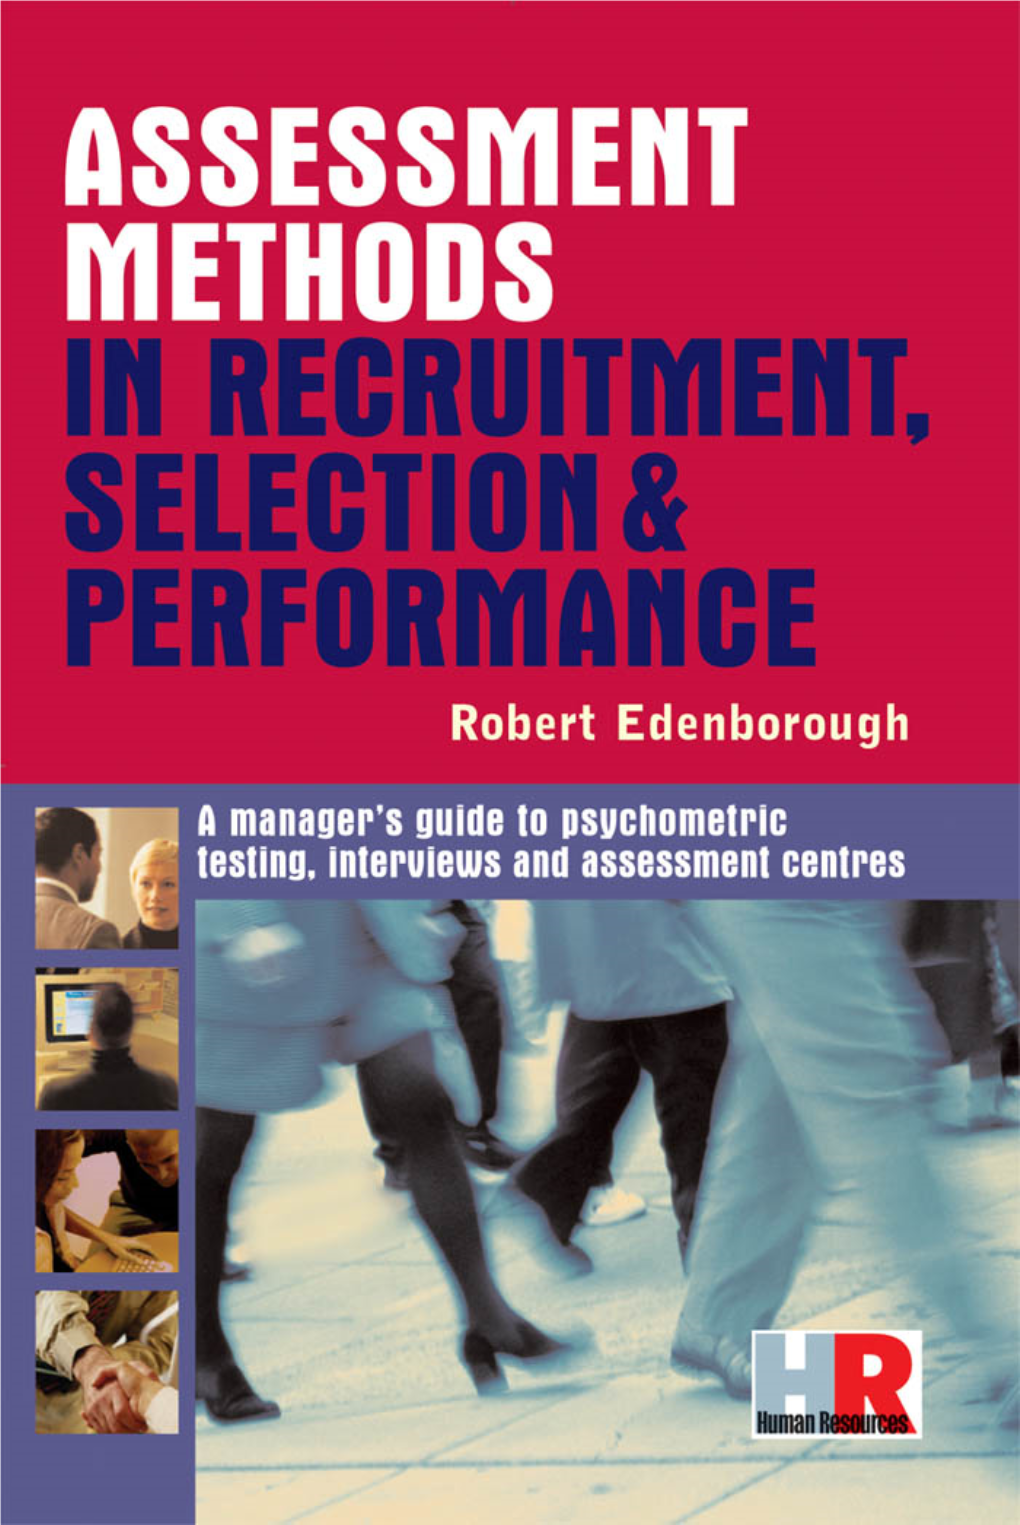 ASSESSMENT METHODS in RECRUITMENT, SELECTION& PERFORMANCE 00 Prelims AMIR.Qxd 16/06/2005 05:51 Pm Page Ii Assessment Methods TP 31/8/05 10:25 Am Page 1